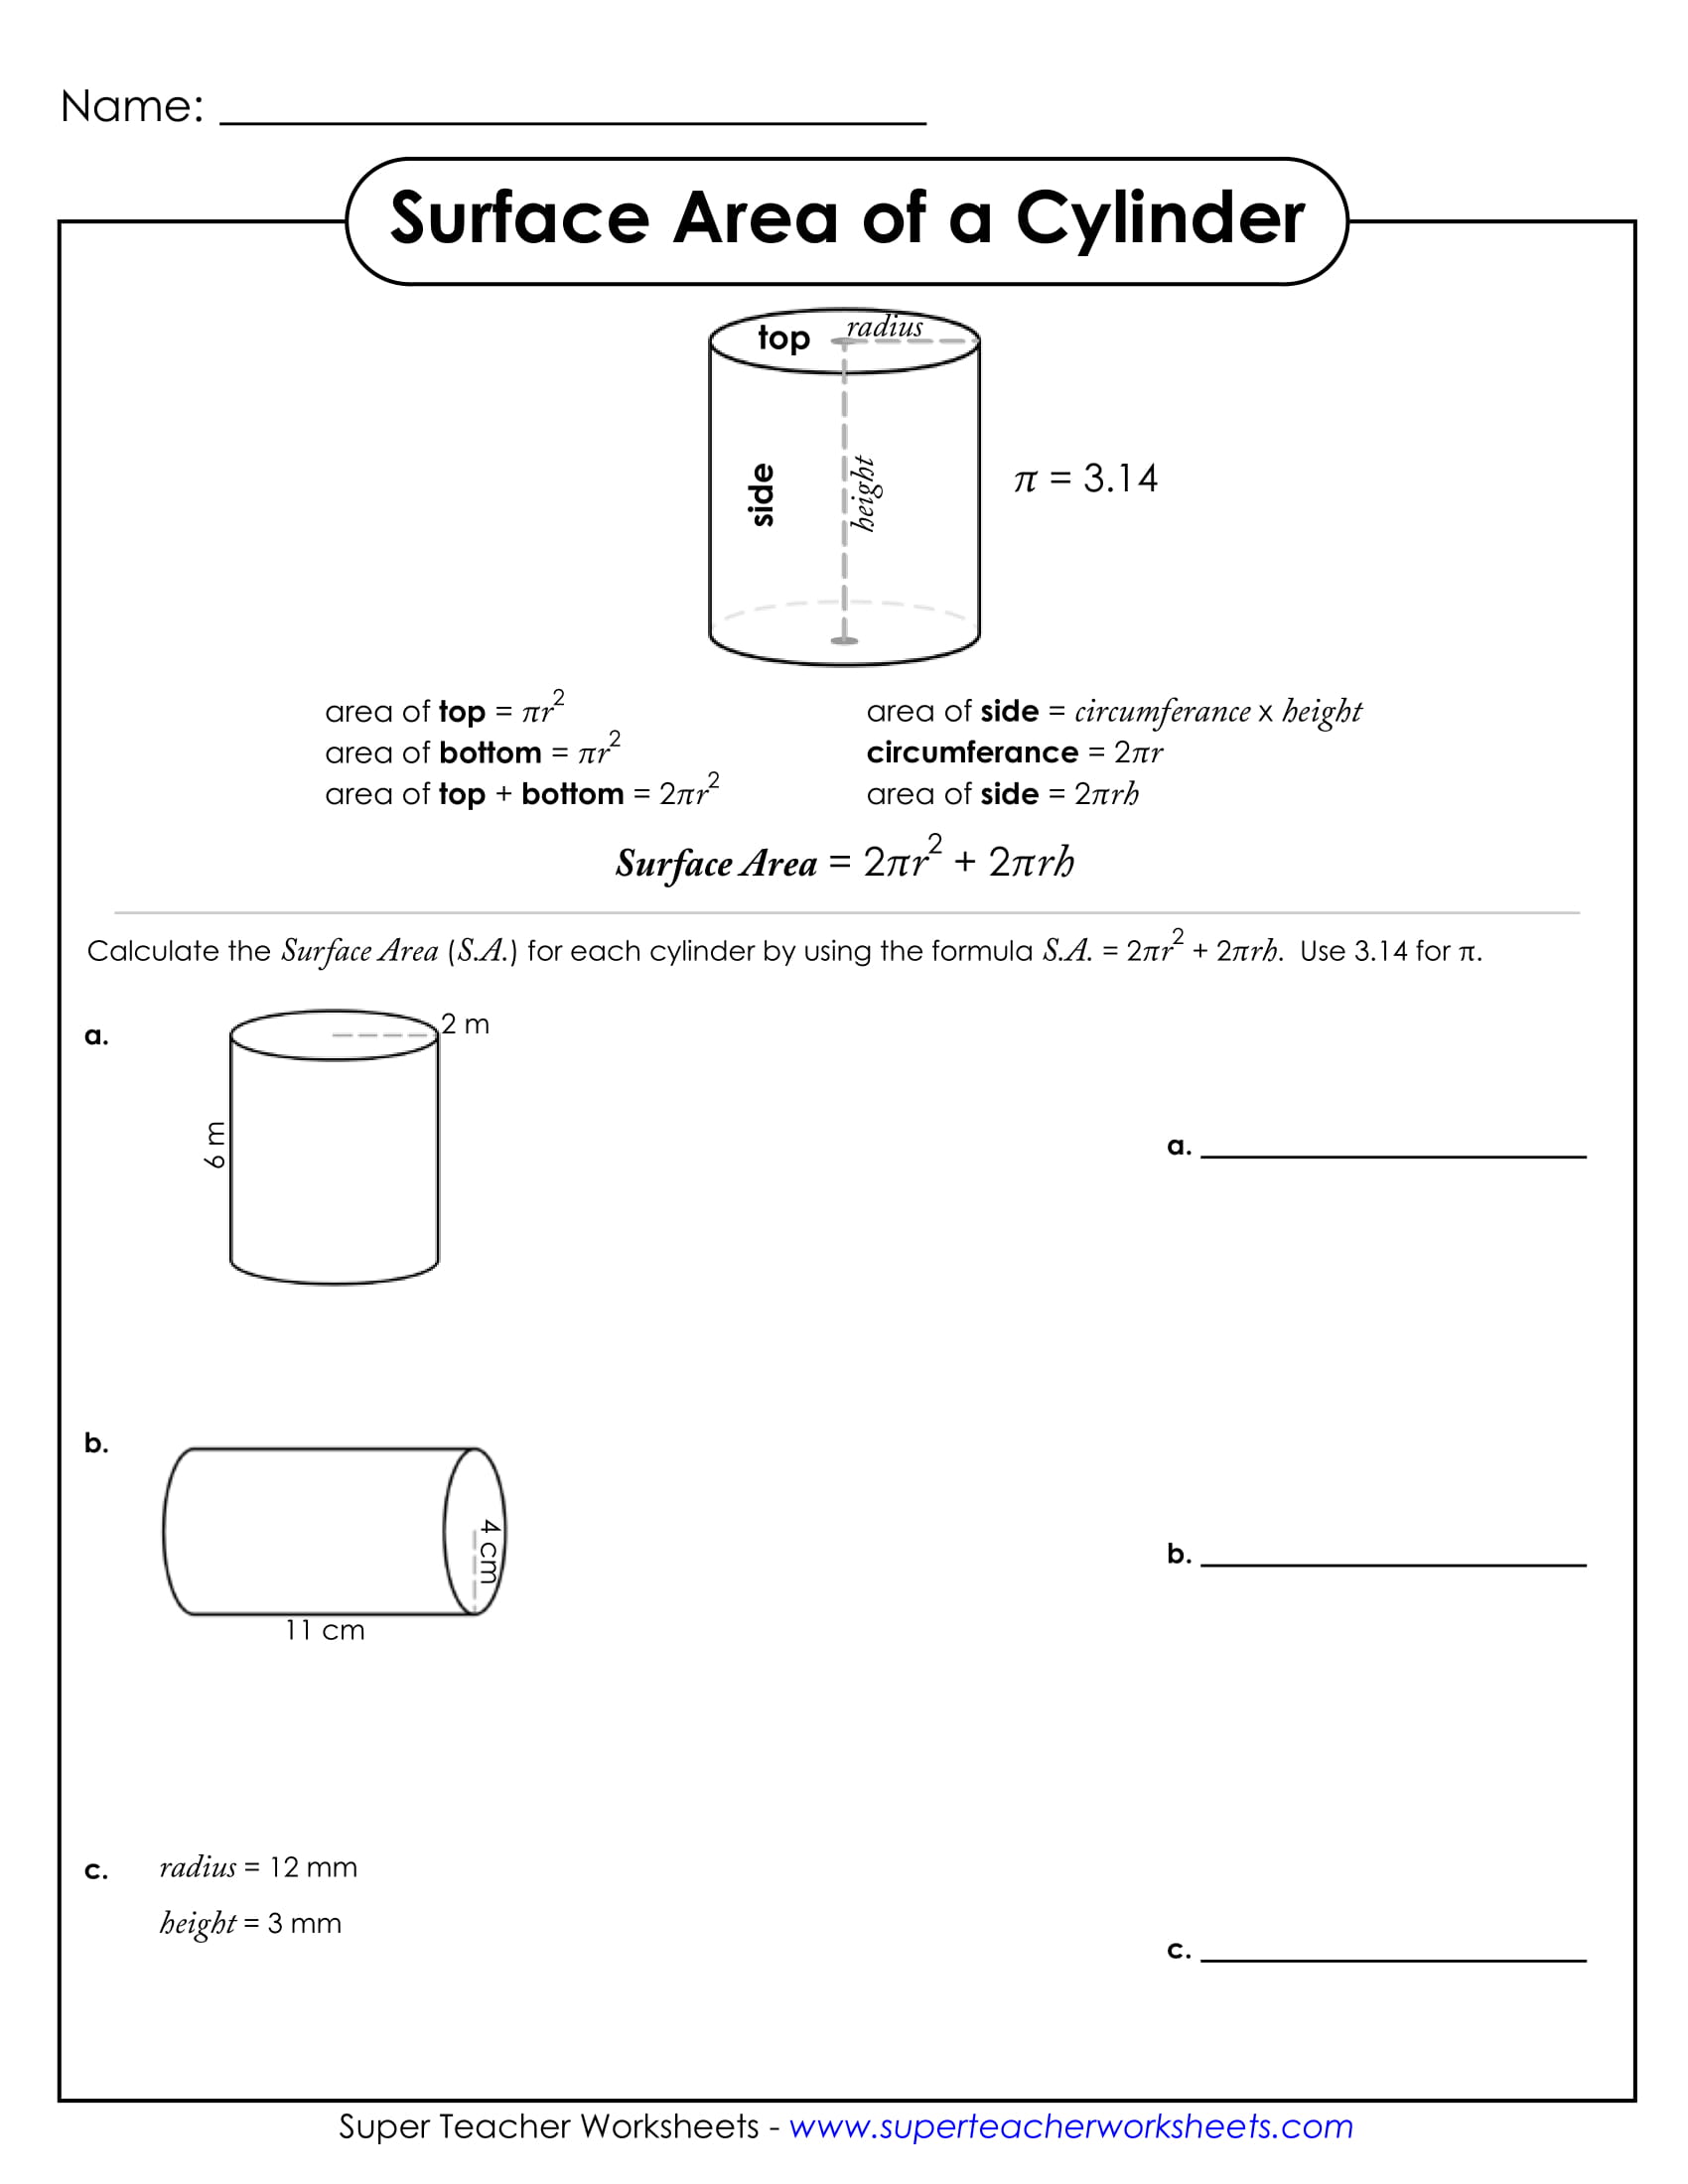 geometry-worksheet-for-students-9-examples-format-pdf-examples